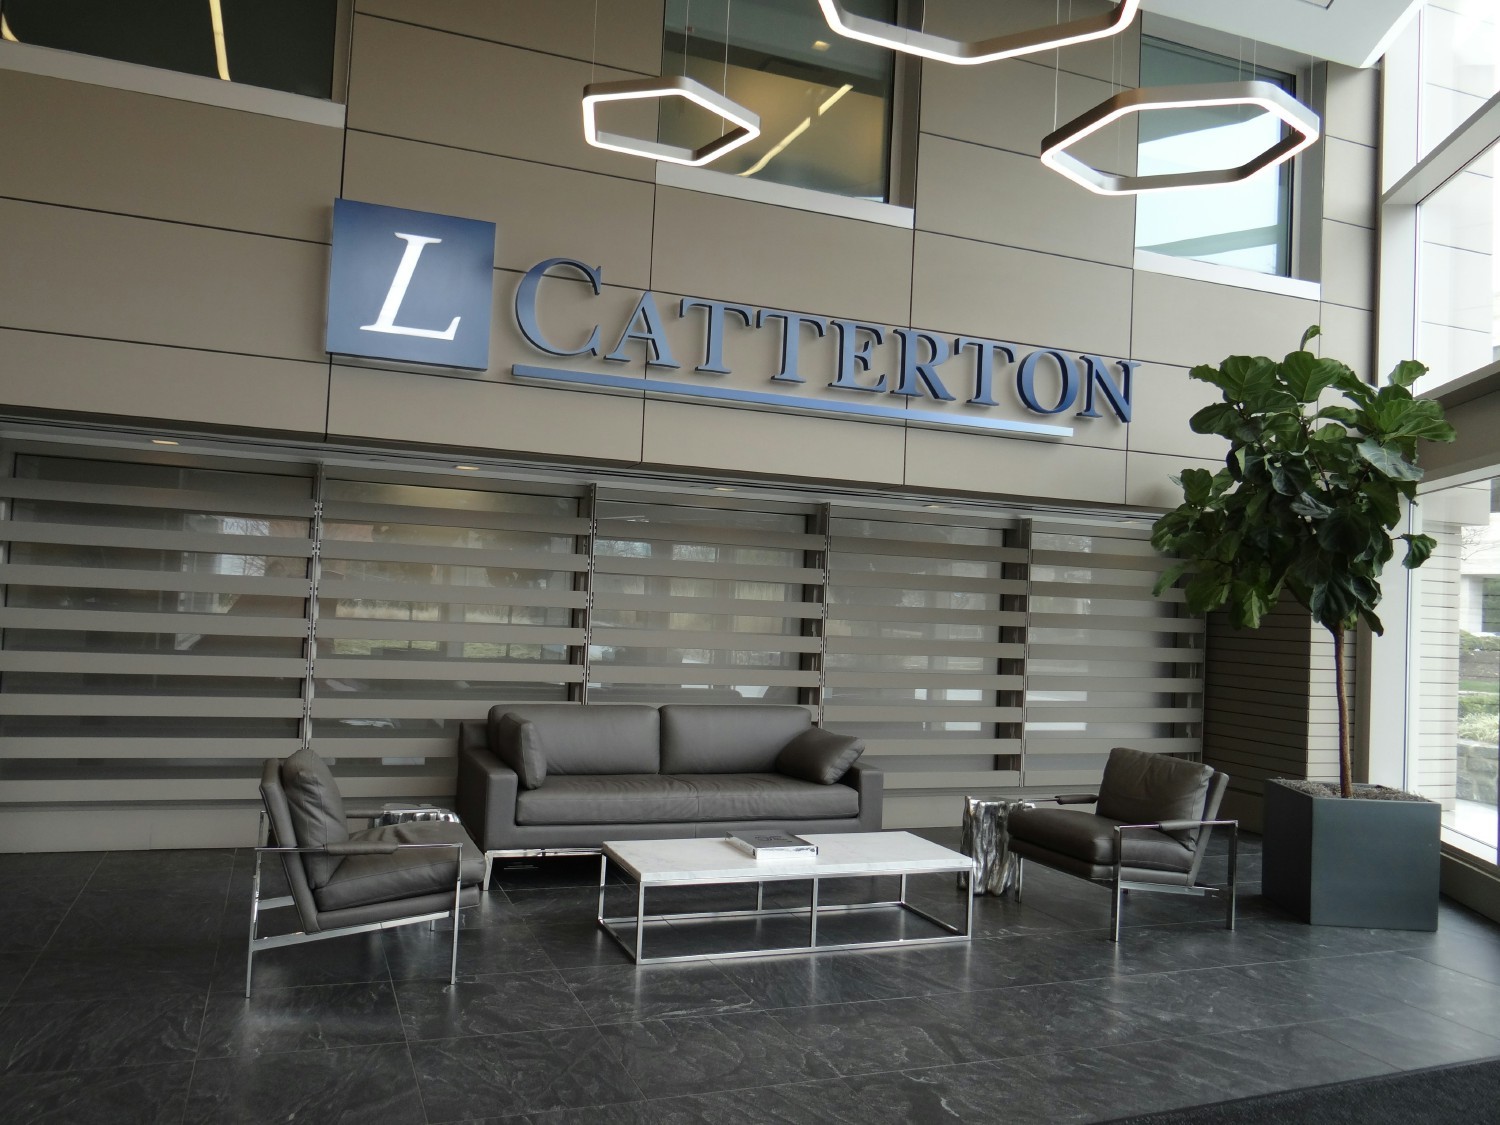 L Catterton on X: L Catterton is pleased to announce the